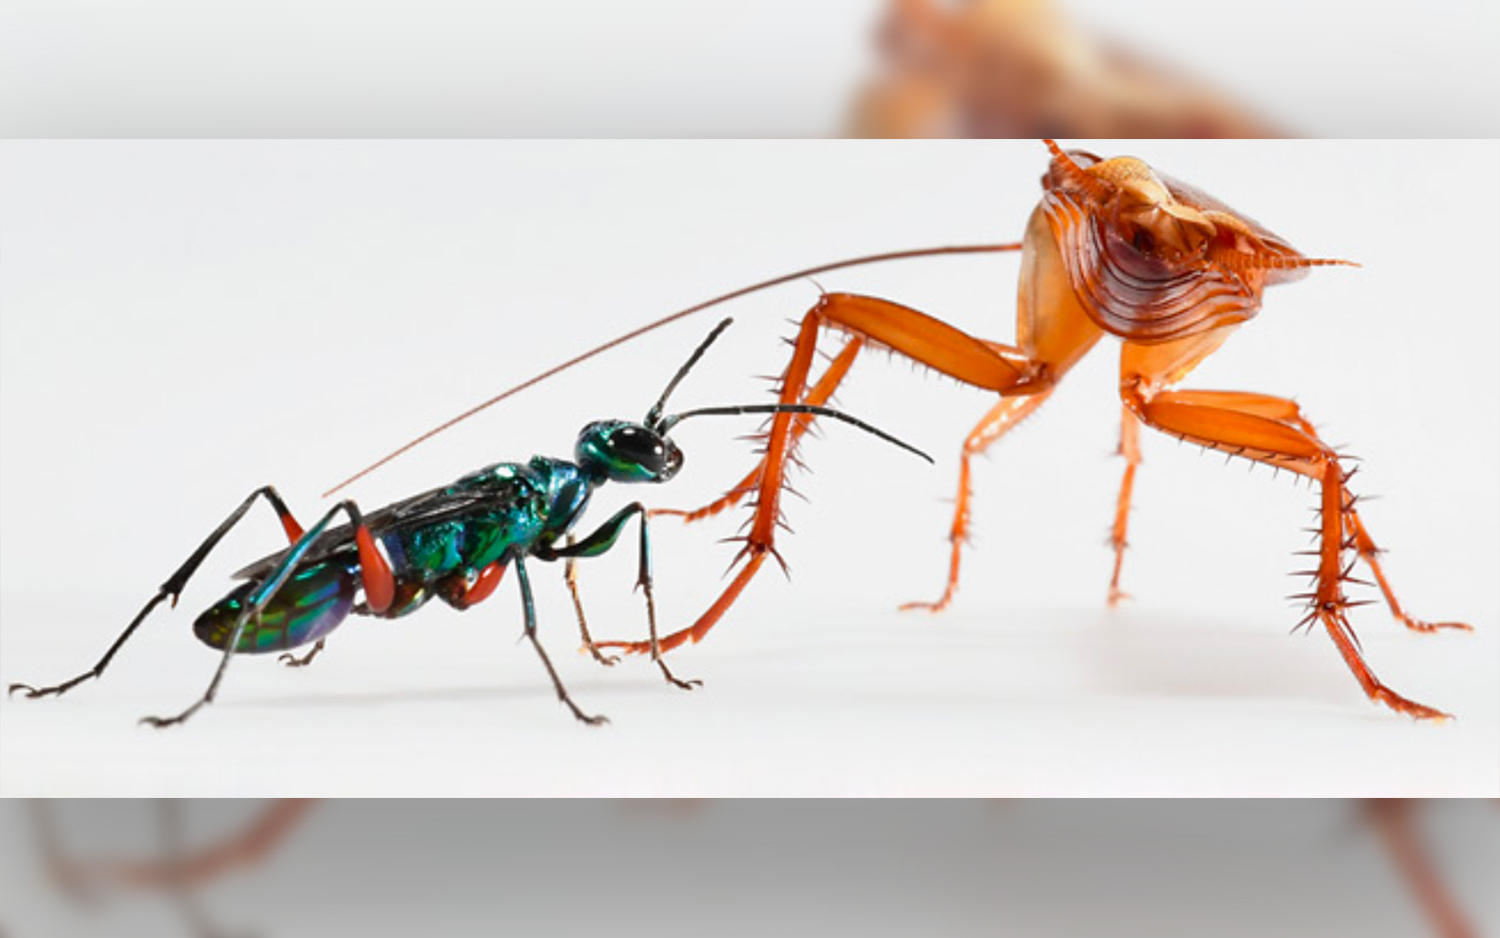 Roaches Kick Wasps in the Head to Avoid Becoming Zombies | Live Science